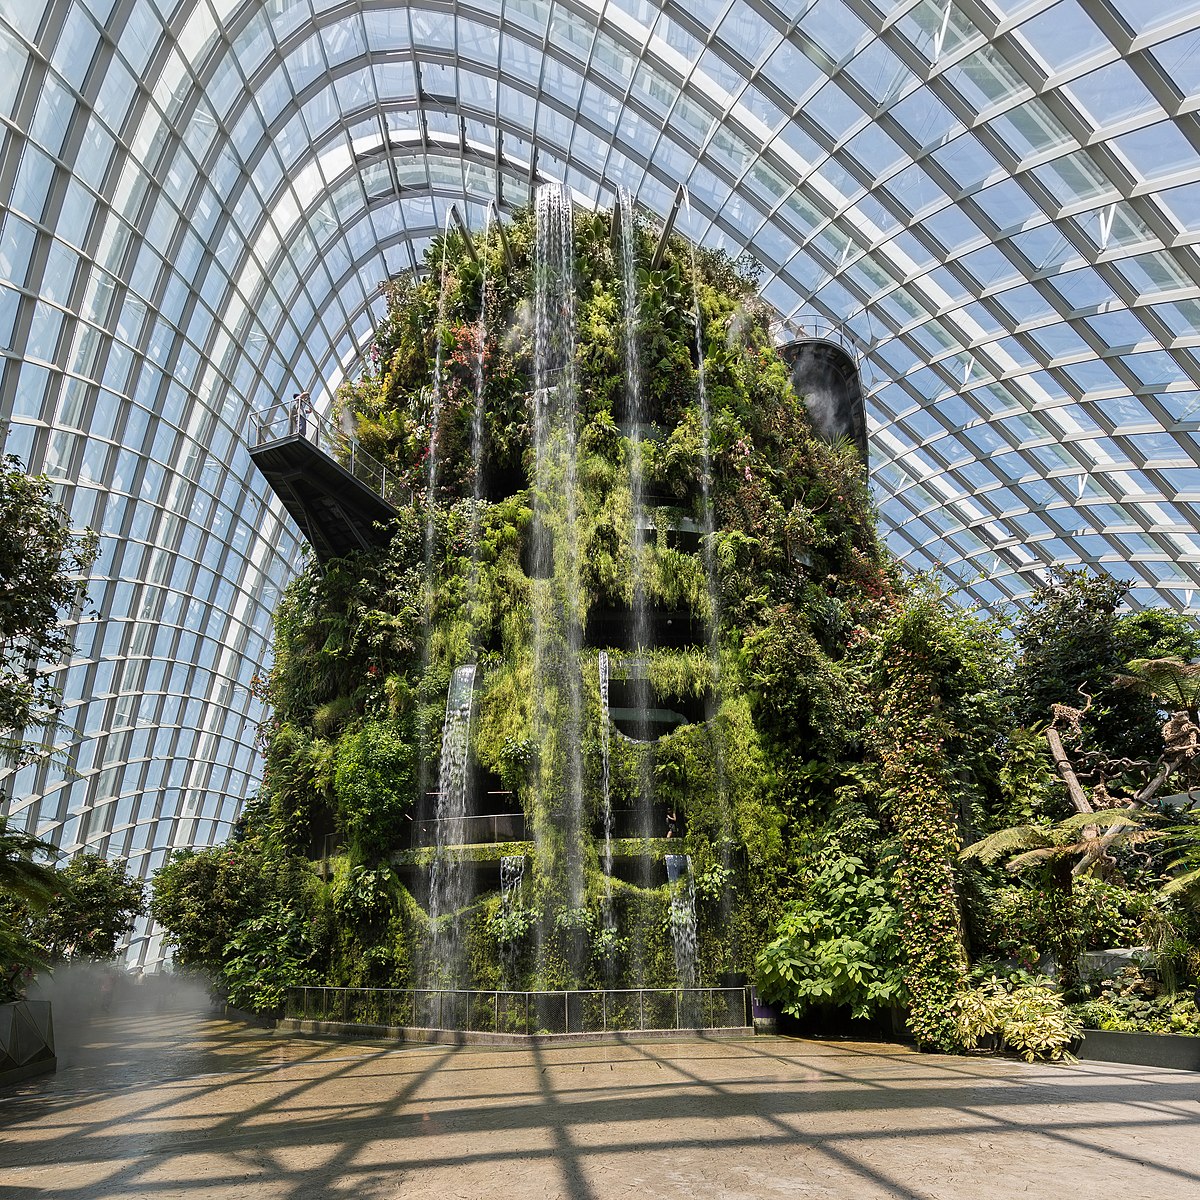 inside a window building with a water fall and greenery